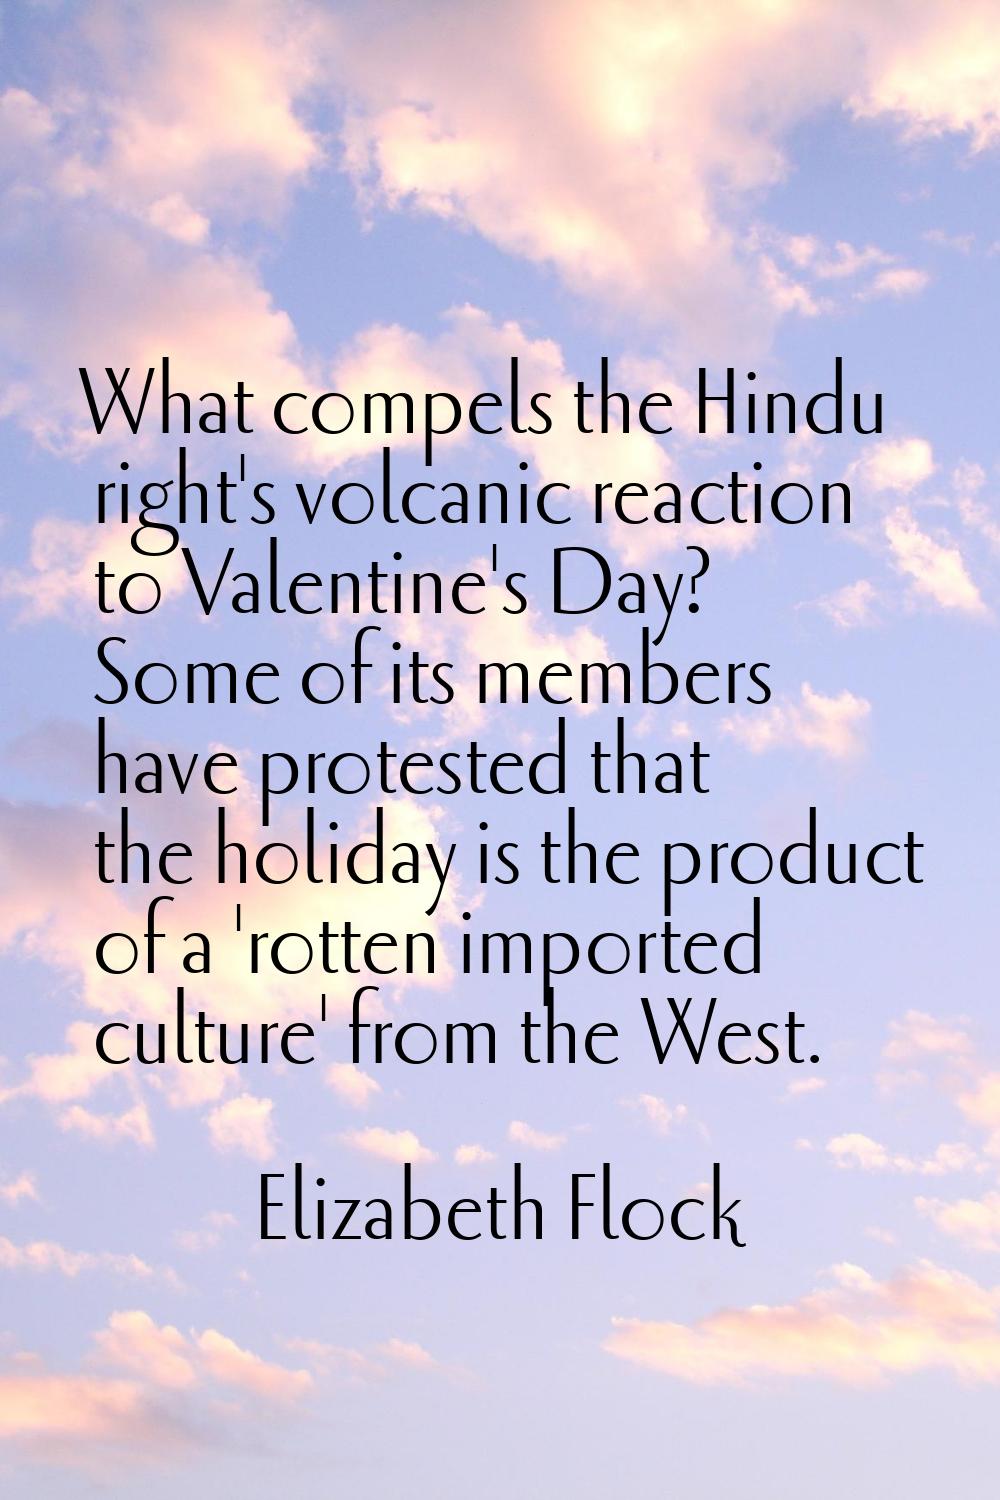 What compels the Hindu right's volcanic reaction to Valentine's Day? Some of its members have prote